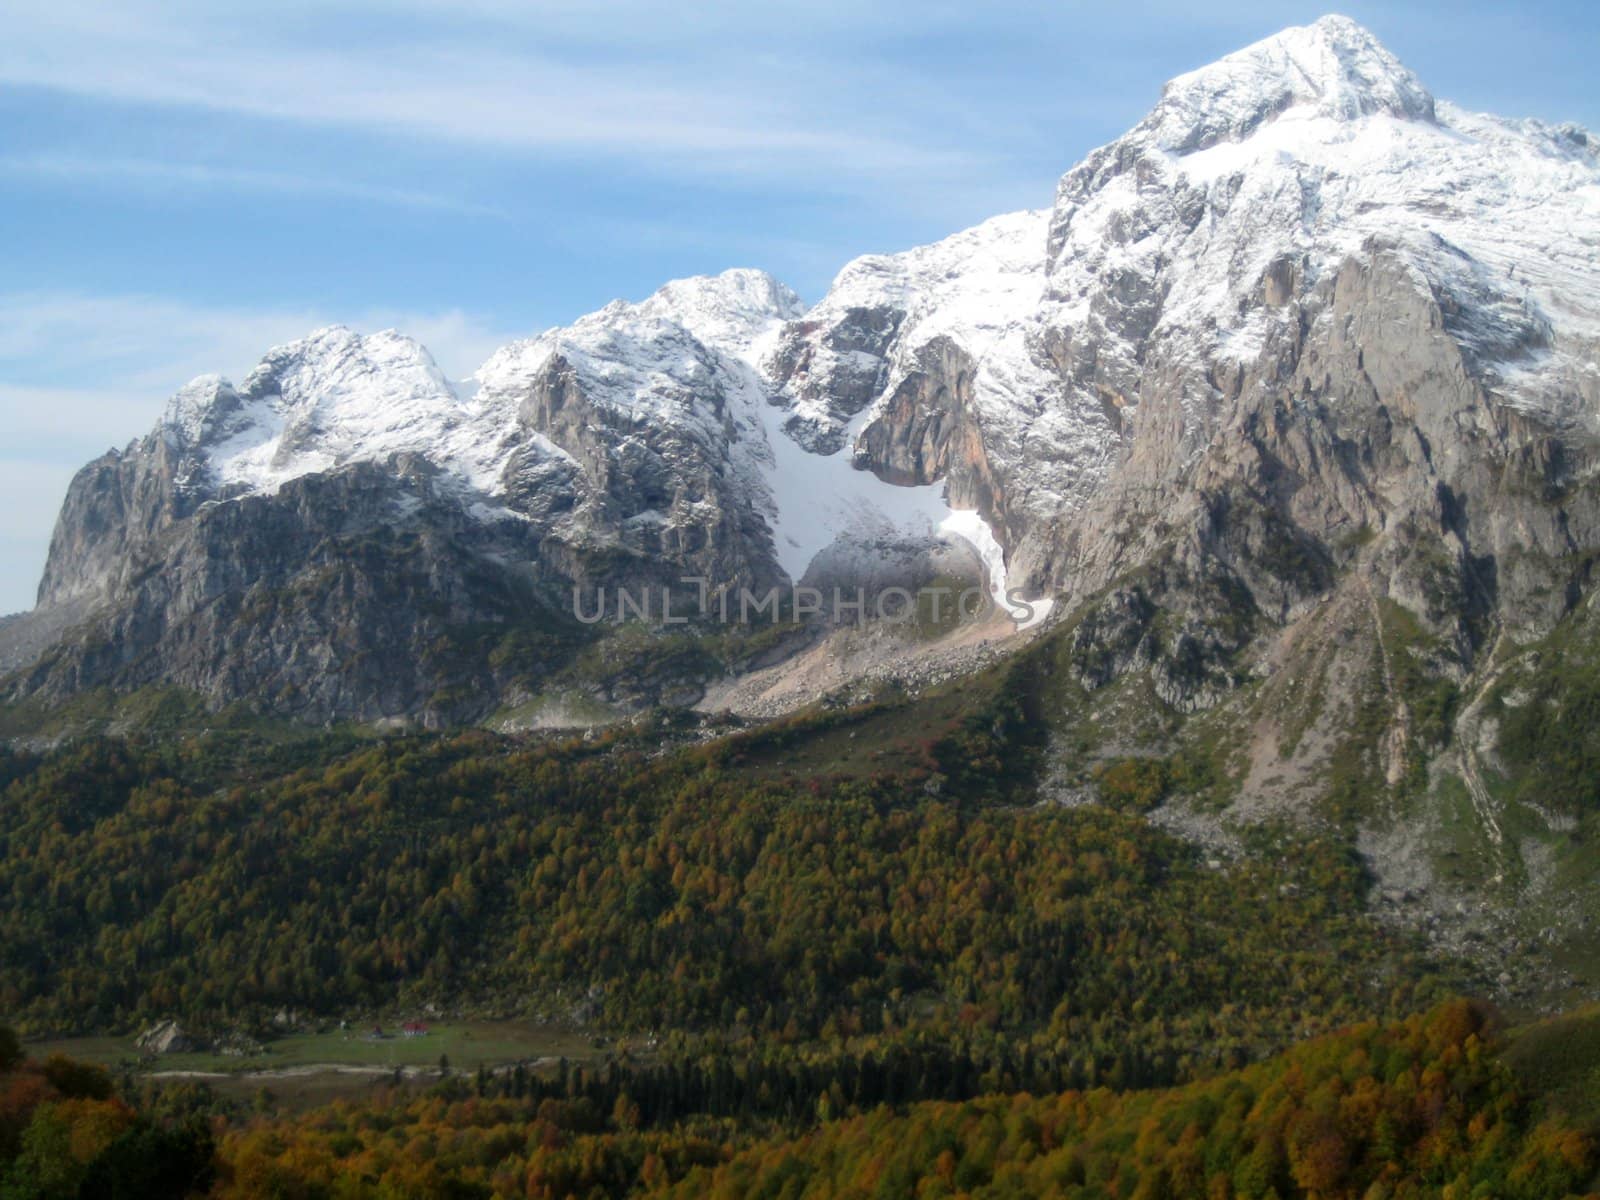 Mountains, caucasus, rocks, a relief, a landscape, wood, the nature, a panorama, a landscape, a ridge, top, breed, the sky, reserve, a pattern, a background, a kind, a structure, trees, a slope, peak, beauty, bright, a file, clouds, snow, a glacier, greens, autumn